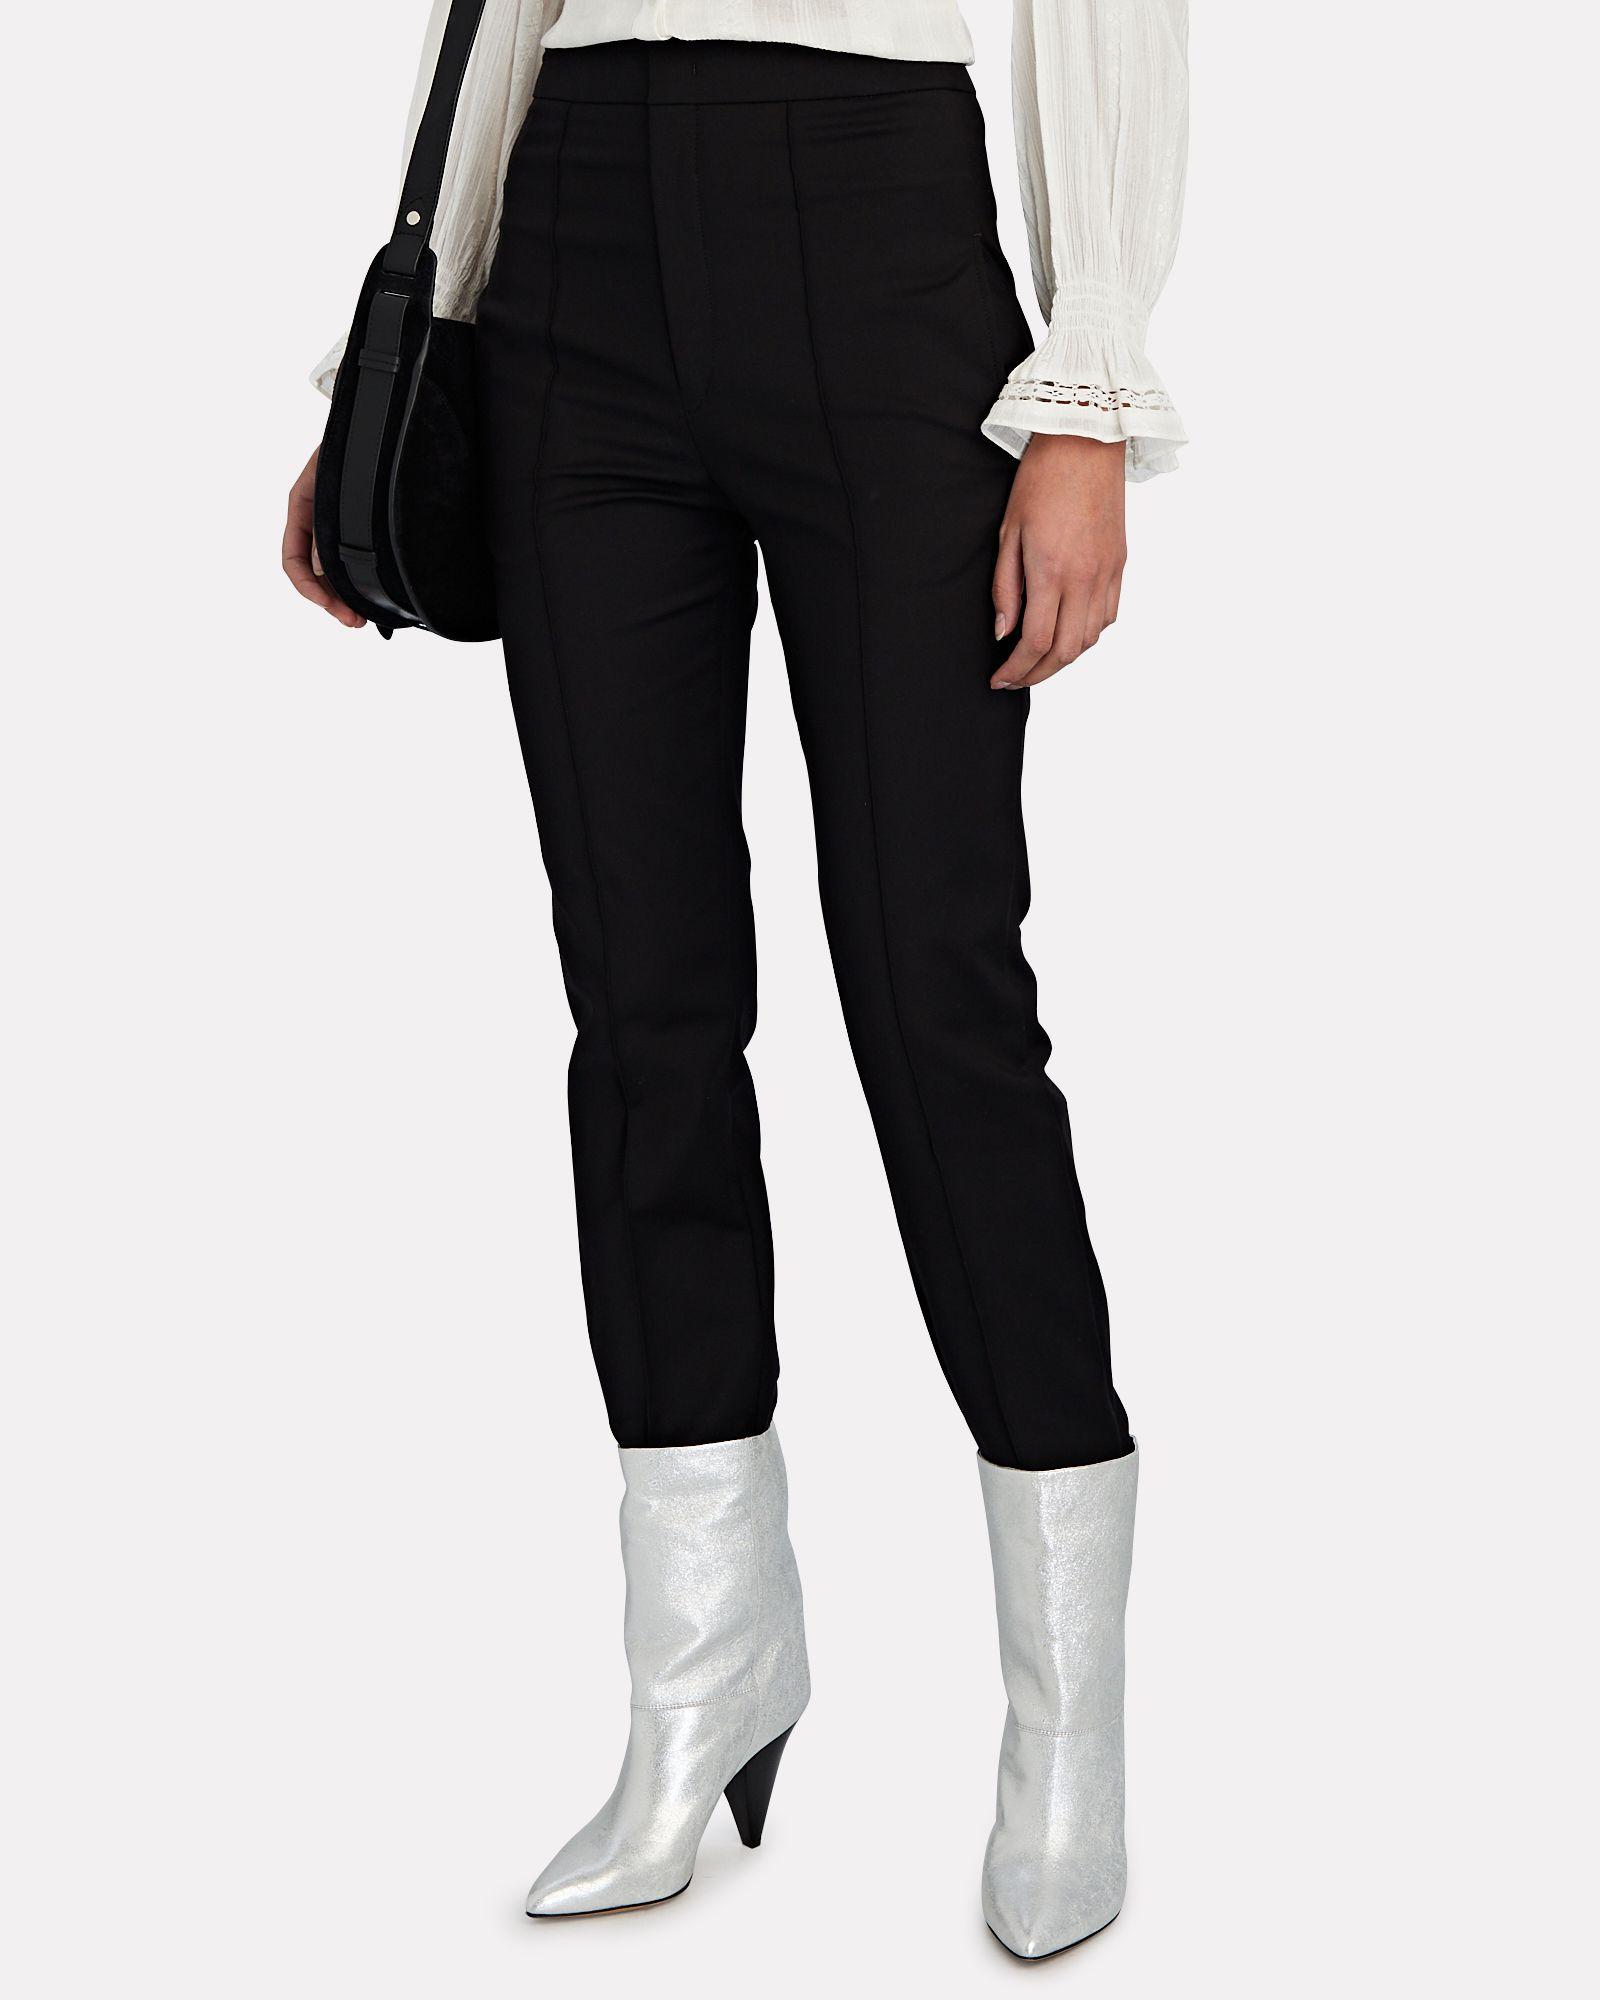 Marant Locky Metallic Ankle Boots in White | Lyst